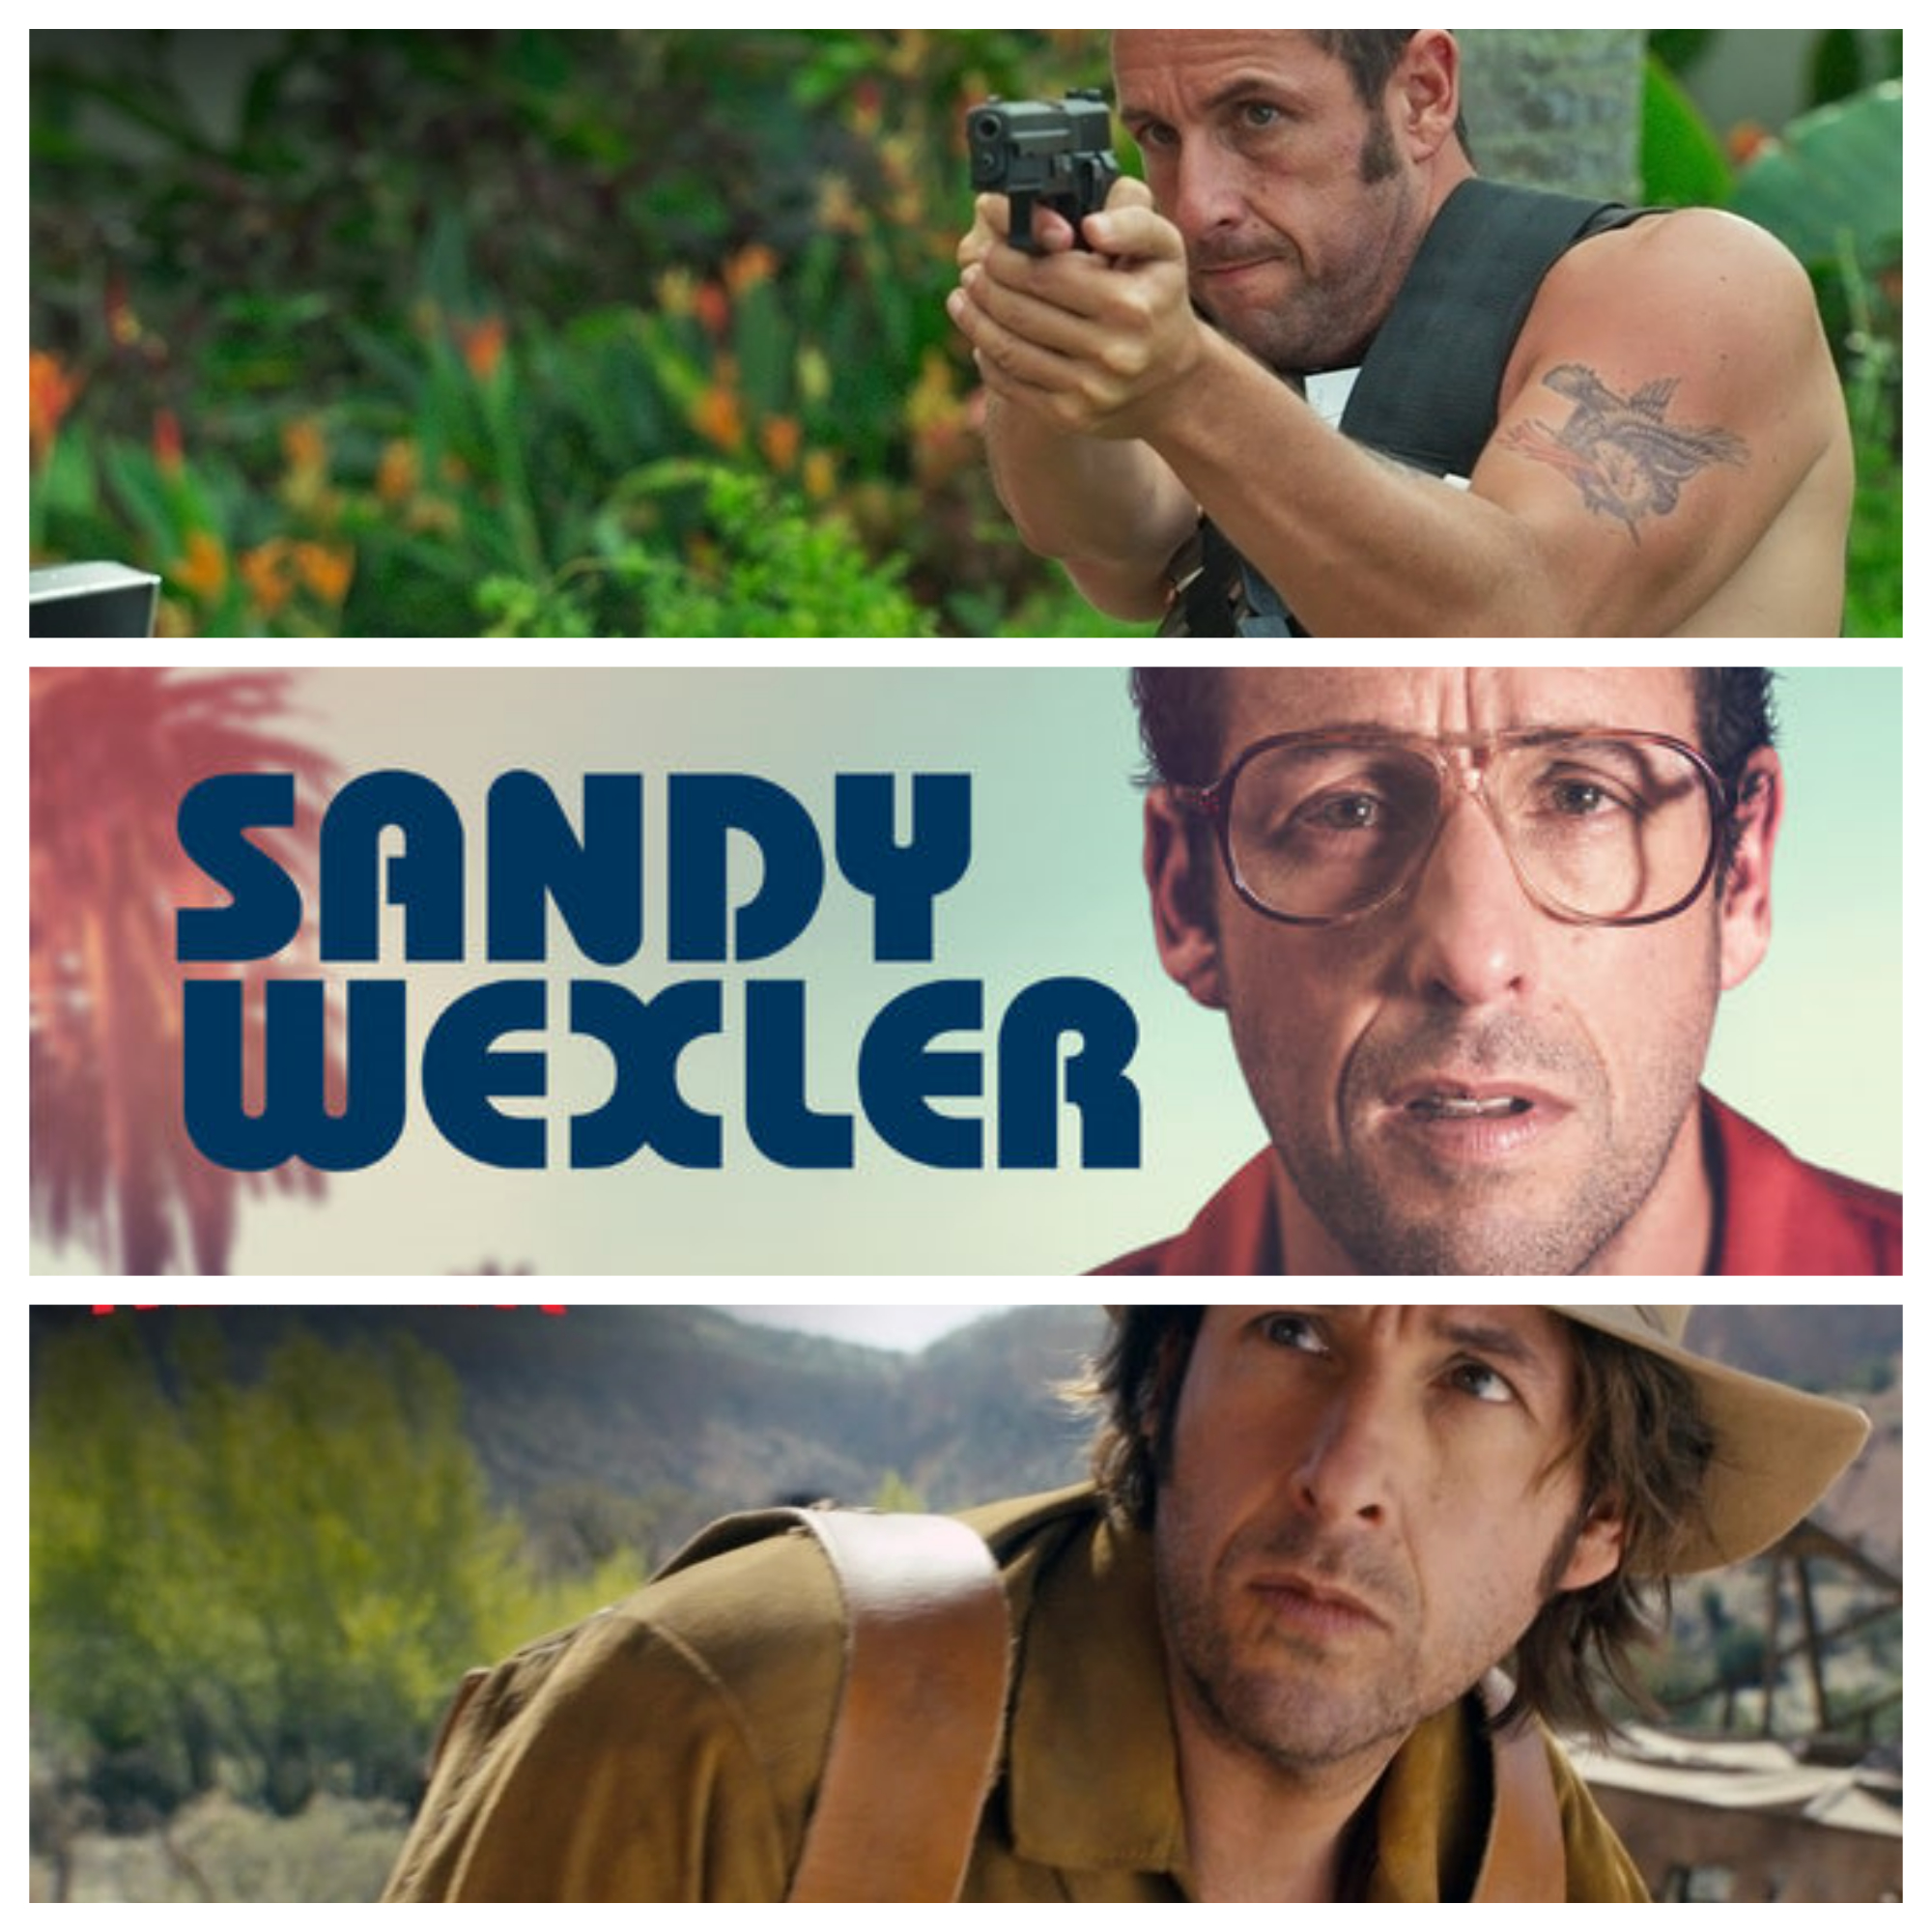 The Daily Crate | Let's Talk About Adam Sandler's Murder Mystery, Guys